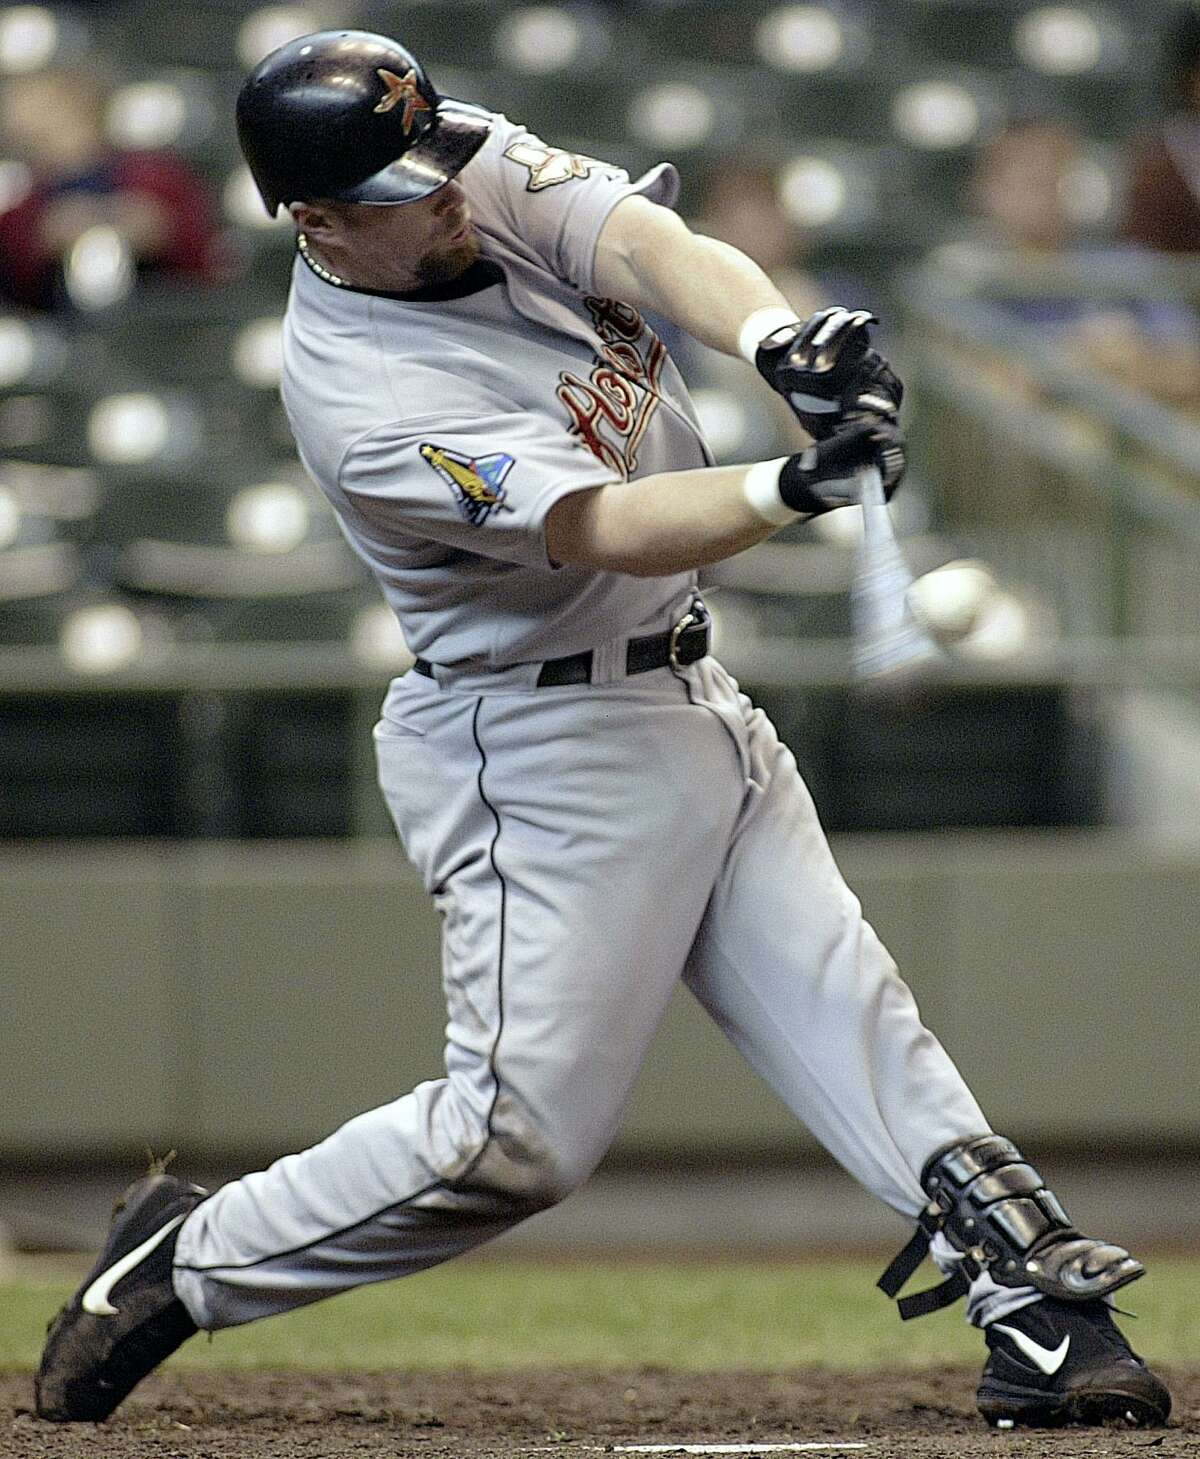 Houston Astros’ Jeff Bagwell hits a home run against the Milwaukee Brewers in the fifth inning on April 20, 2003, in Milwaukee.